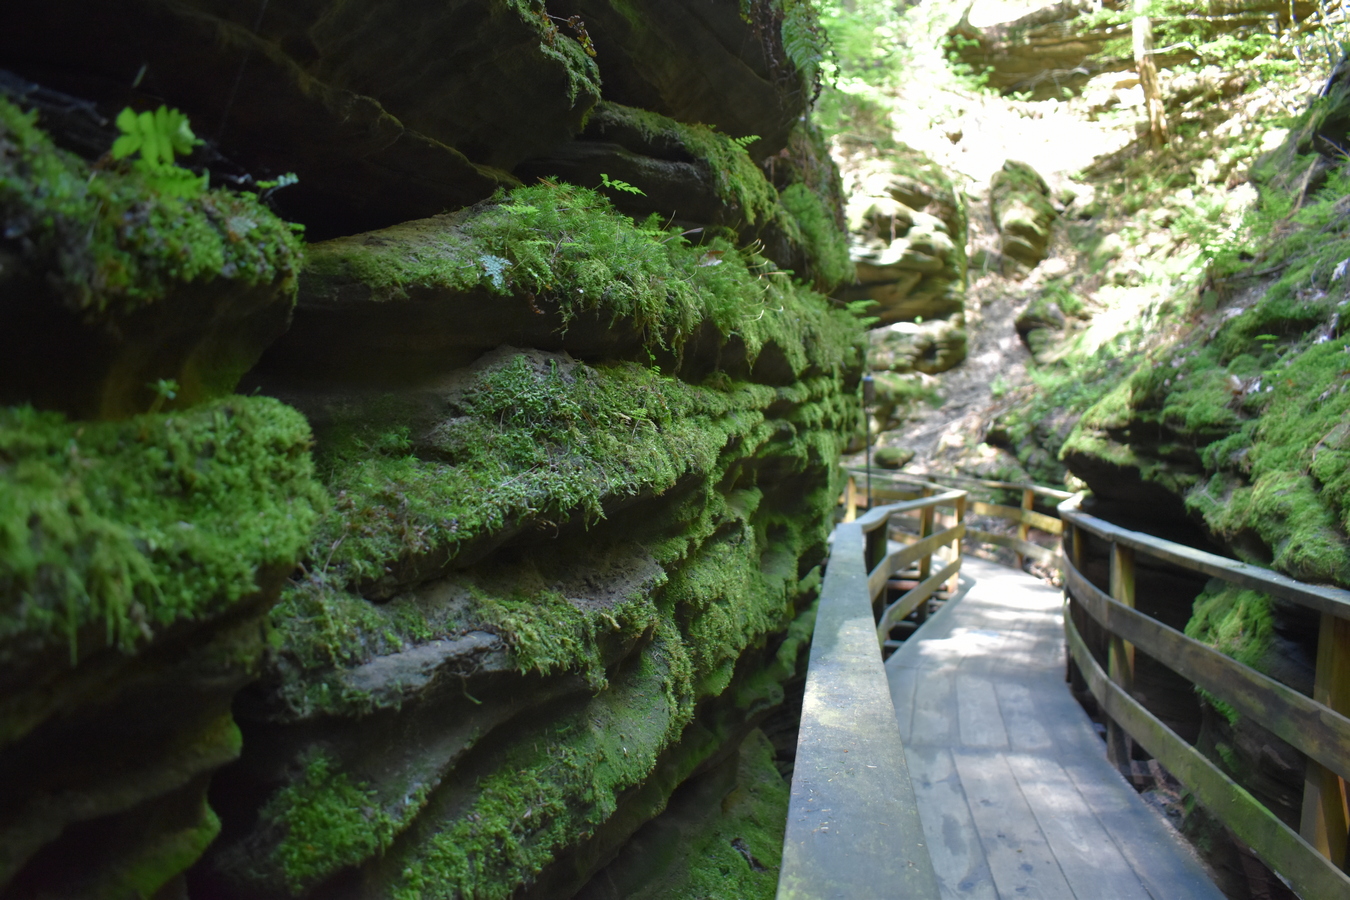 A trip on the Dells Boat Tour leads to some amazing views of the Wisconsin slot canyons.